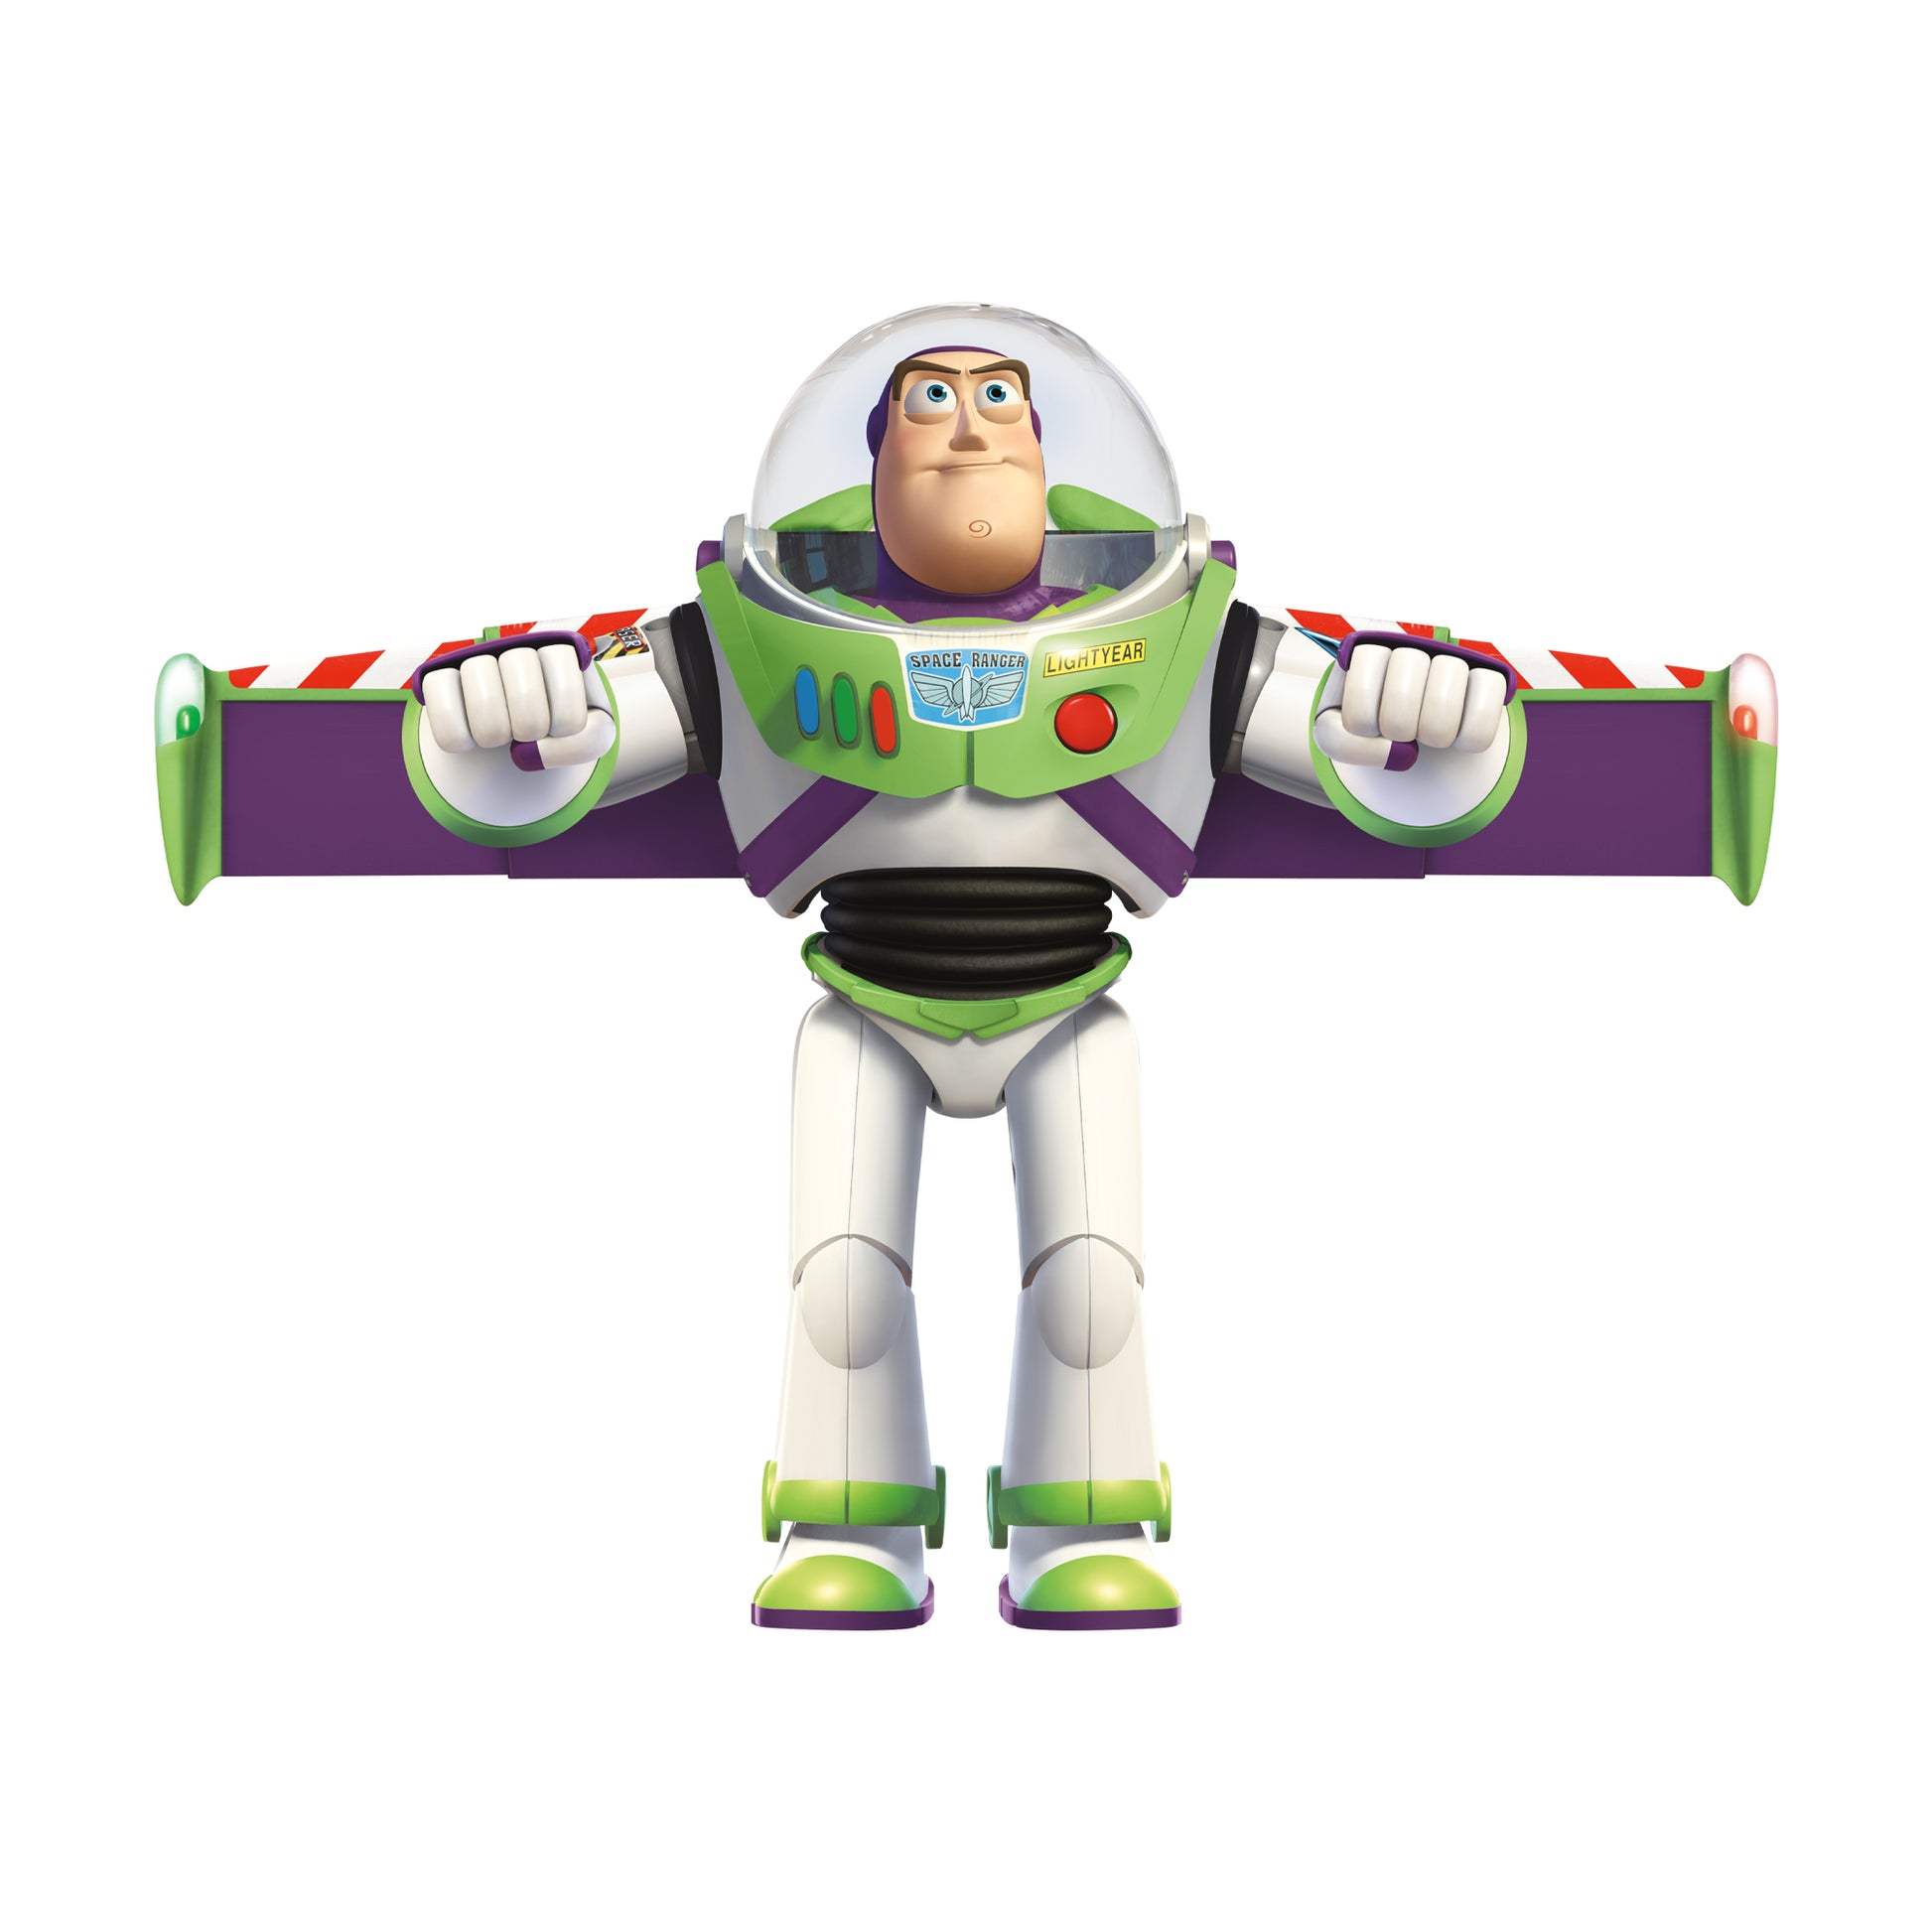 buzz lightyear flying png